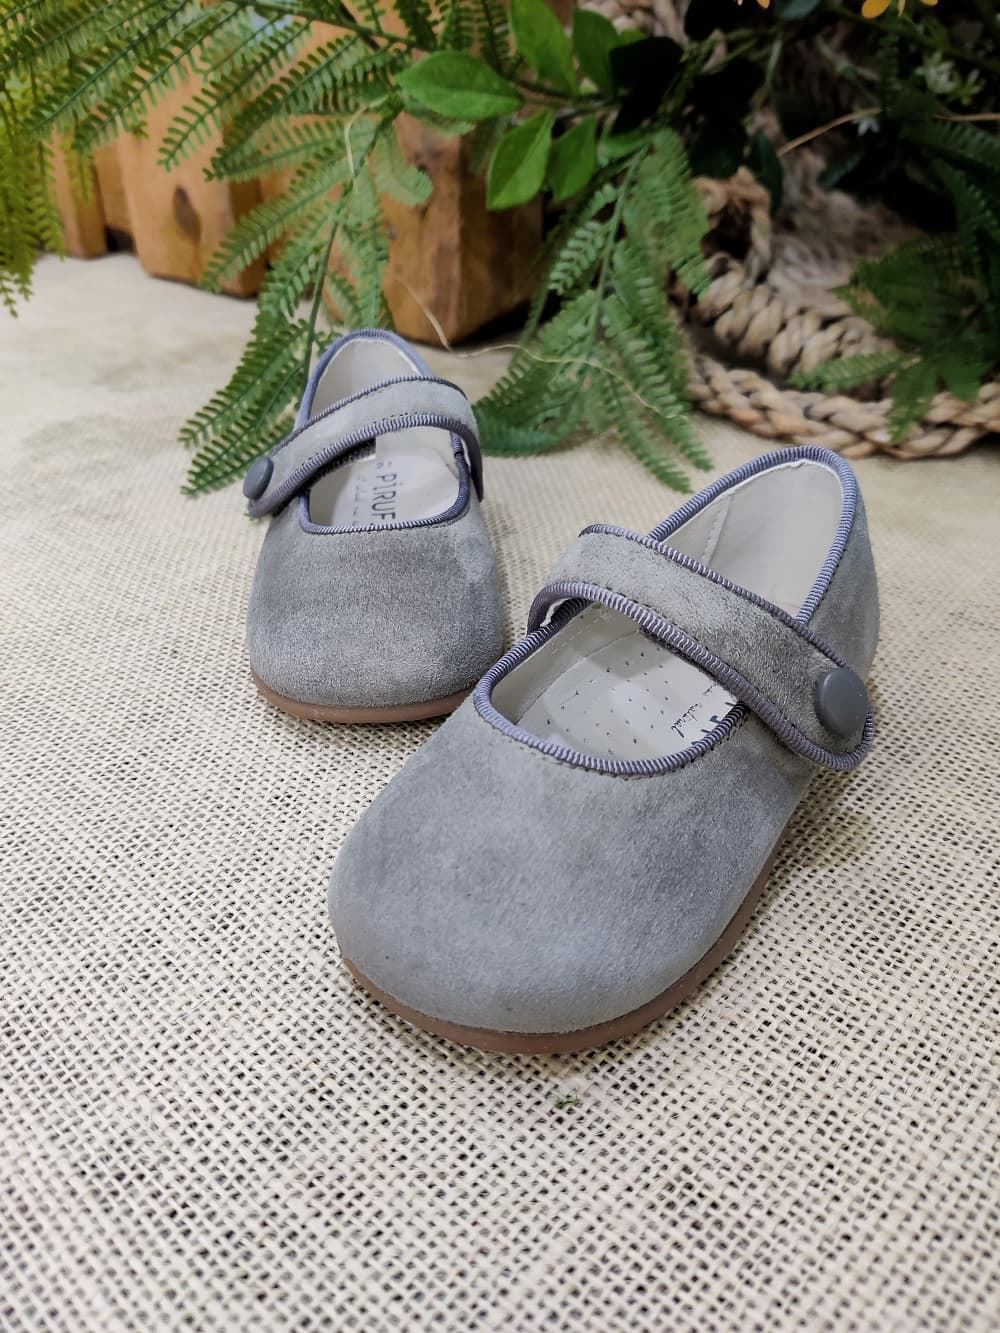 Pirufin (Piruflex) Mary Janes for baby girls in Gray suede - Image 5